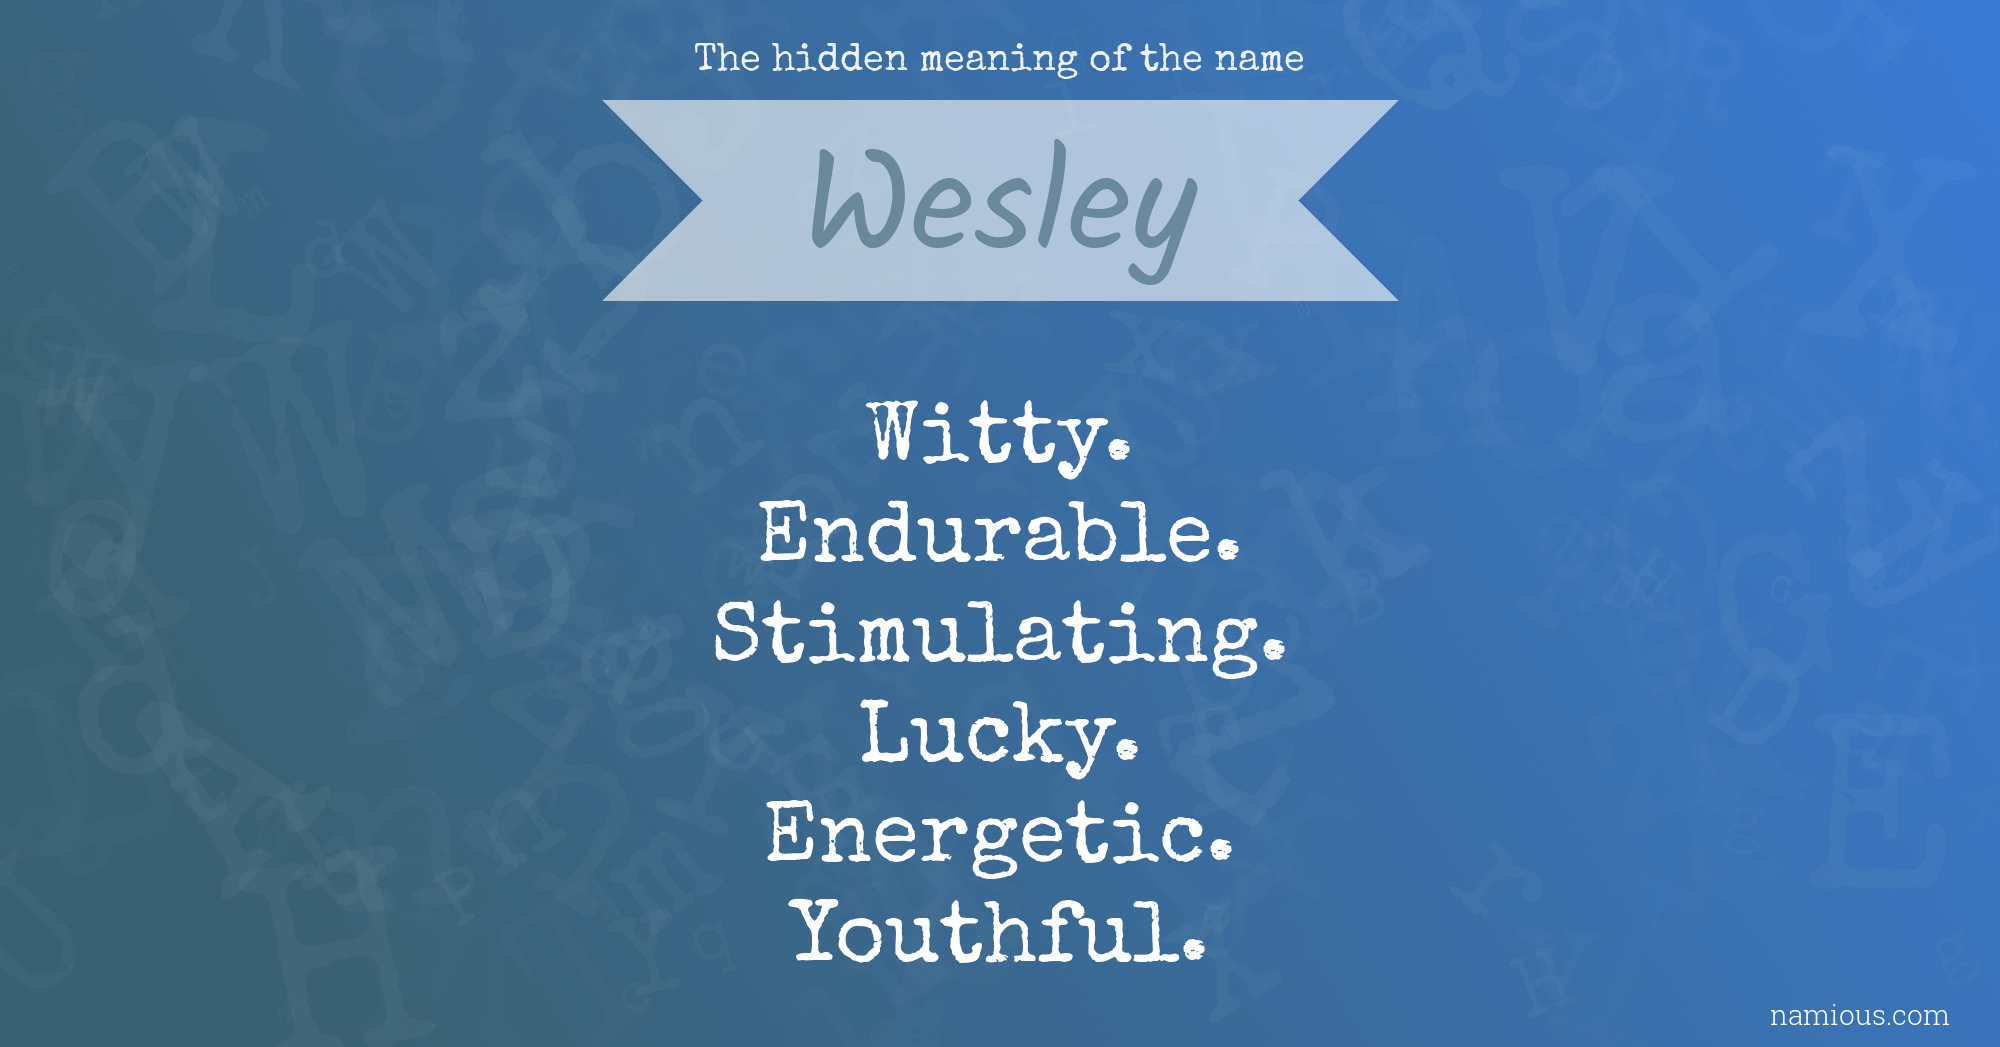 The hidden meaning of the name Wesley | Namious